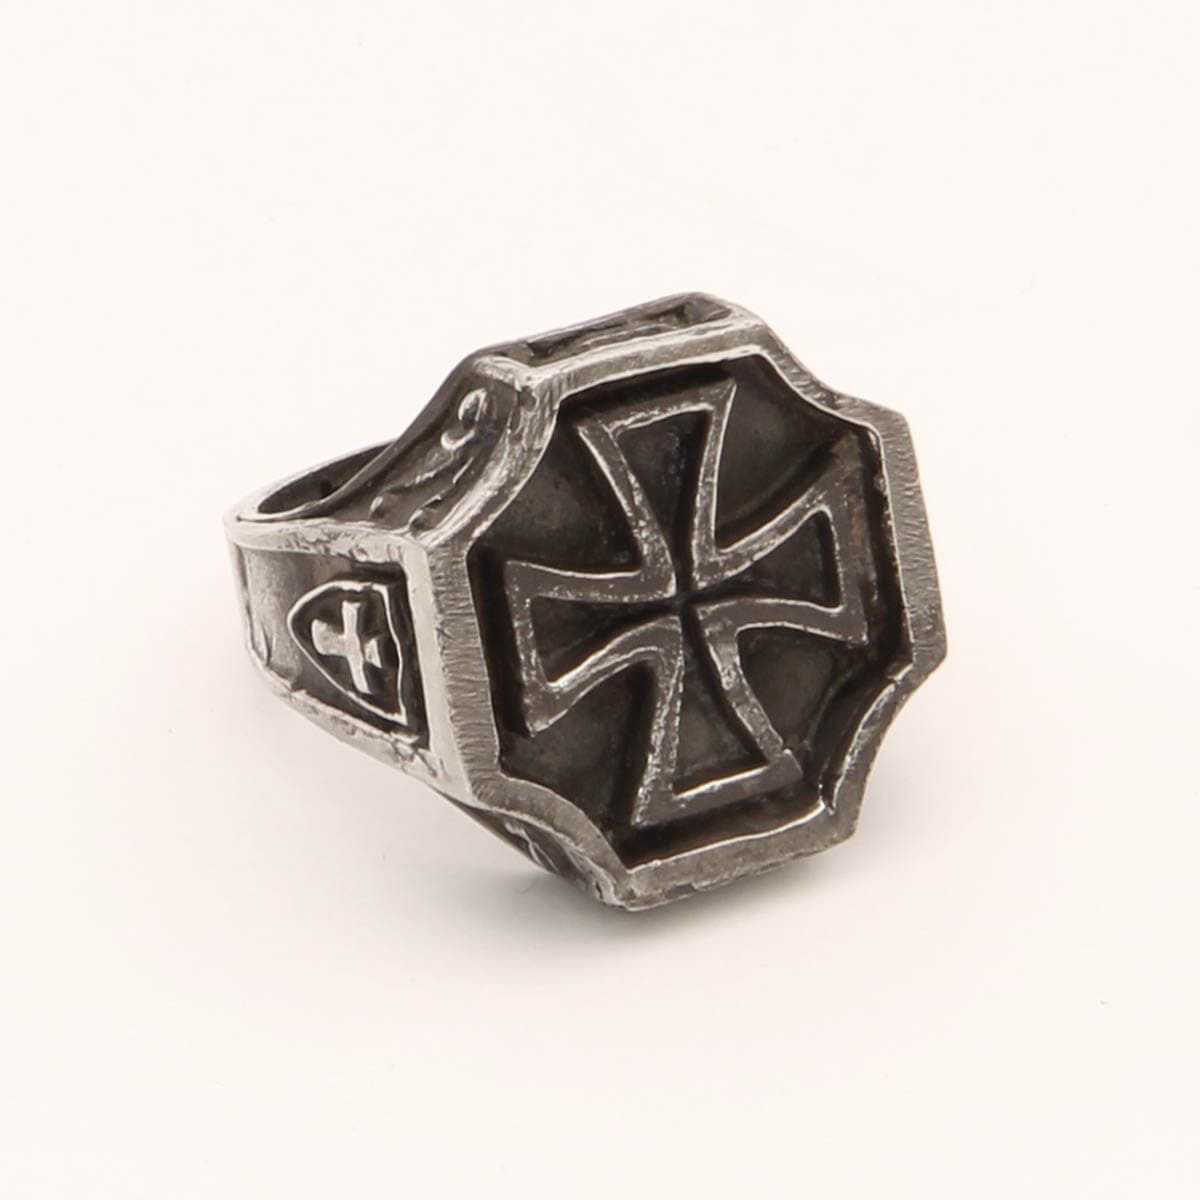 Knights Templar Ring Templar with Maltese cross signet, and crosses, flourishes and crowns on sides